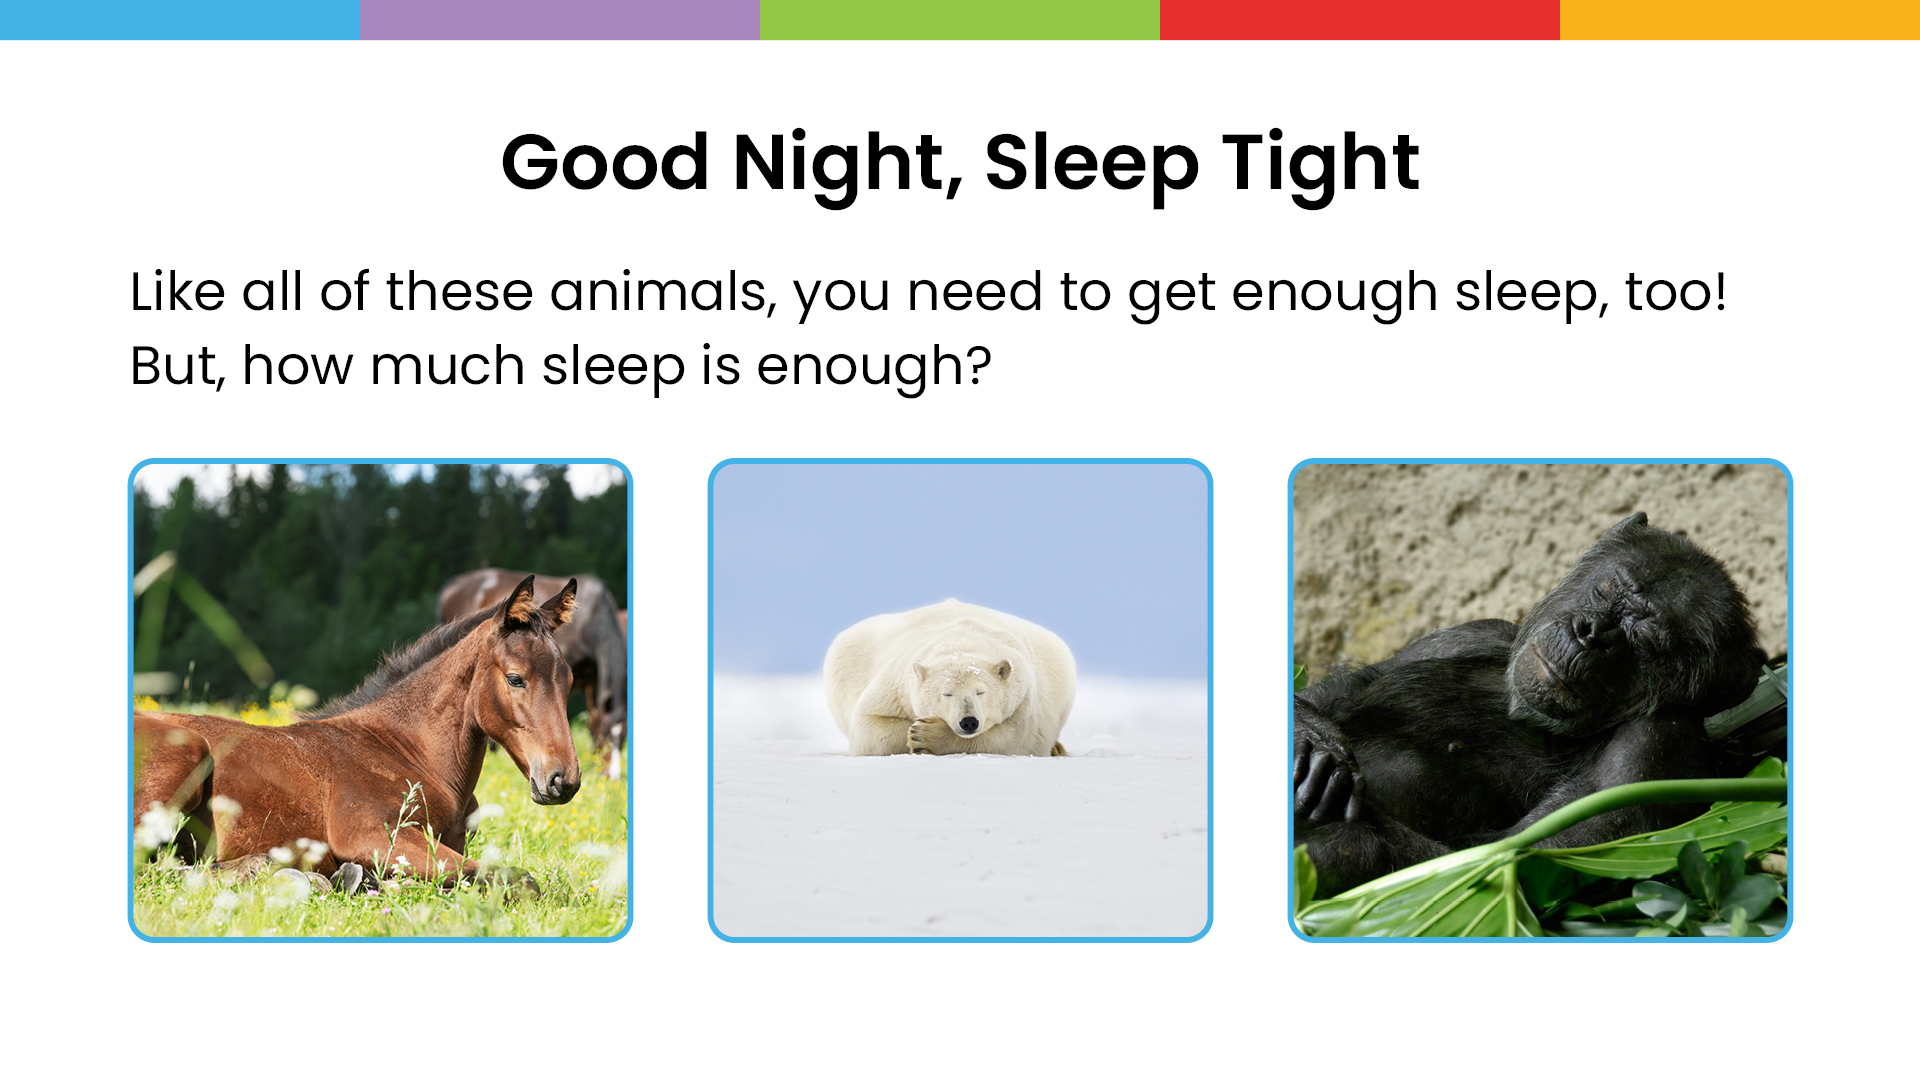 Enough Sleep slideshow - Grades K5 - Facts and images about animal and human sleep - Sanford fit